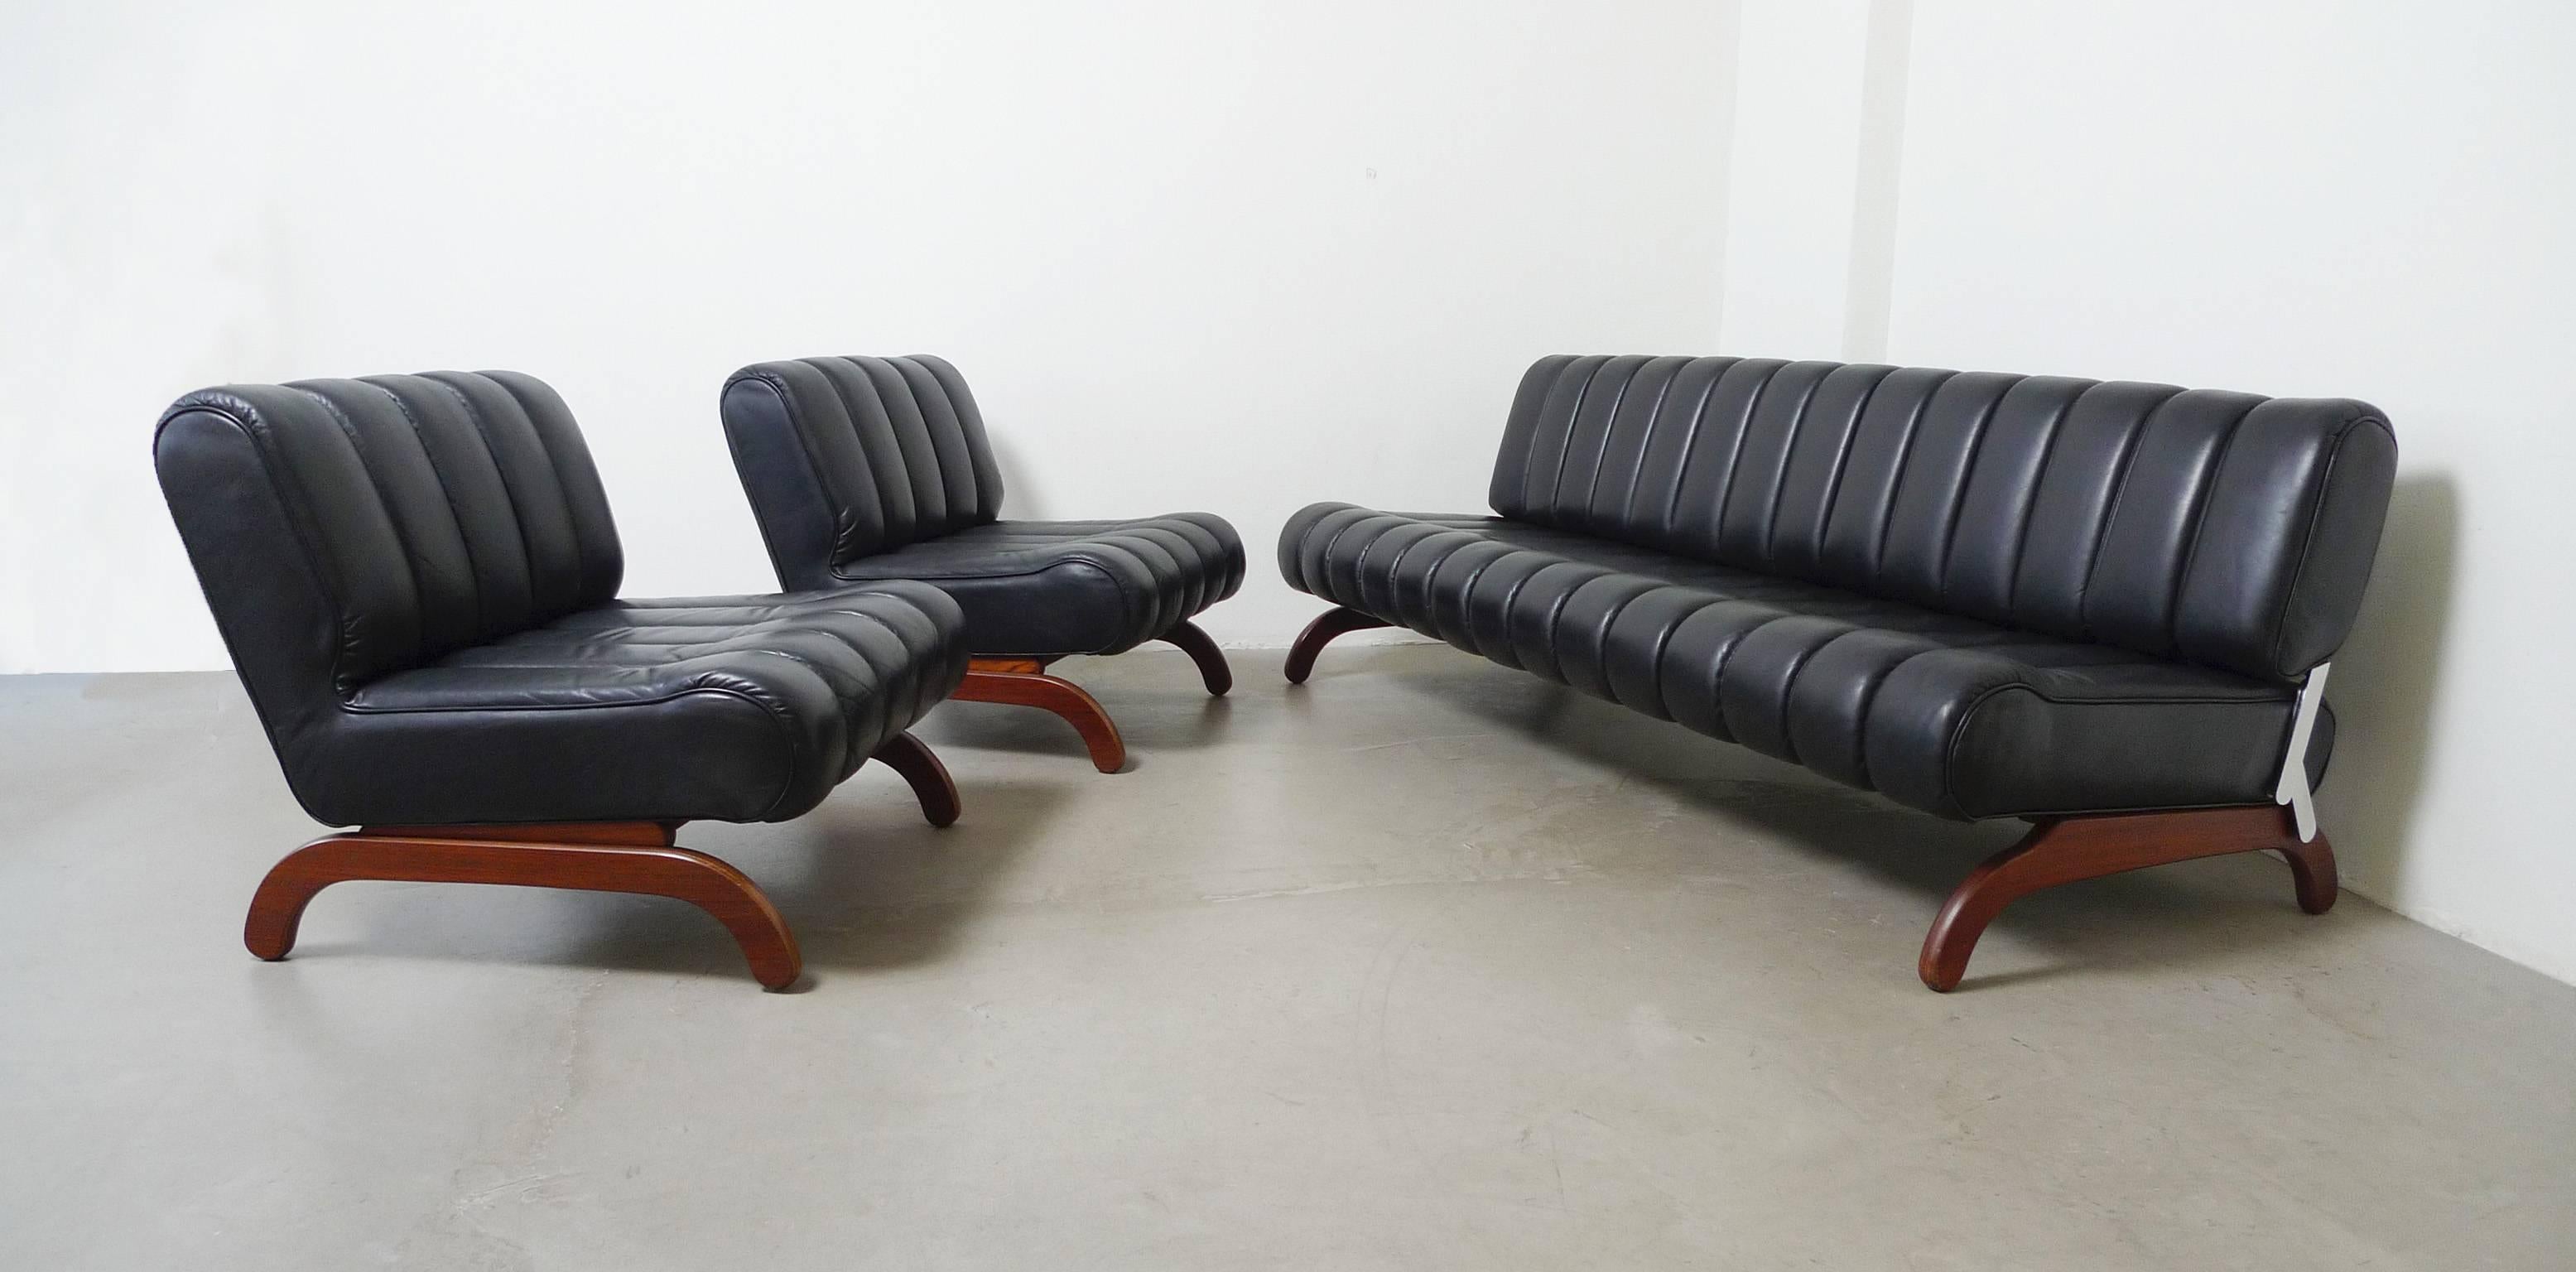 Very rare and extraordinary streamlined seating group with sofa bed and two easy chairs. Upholstery and black leather cover is subdivided through longish quilted seams. The base has the form of an elegant curved bow and is made of wood. The back